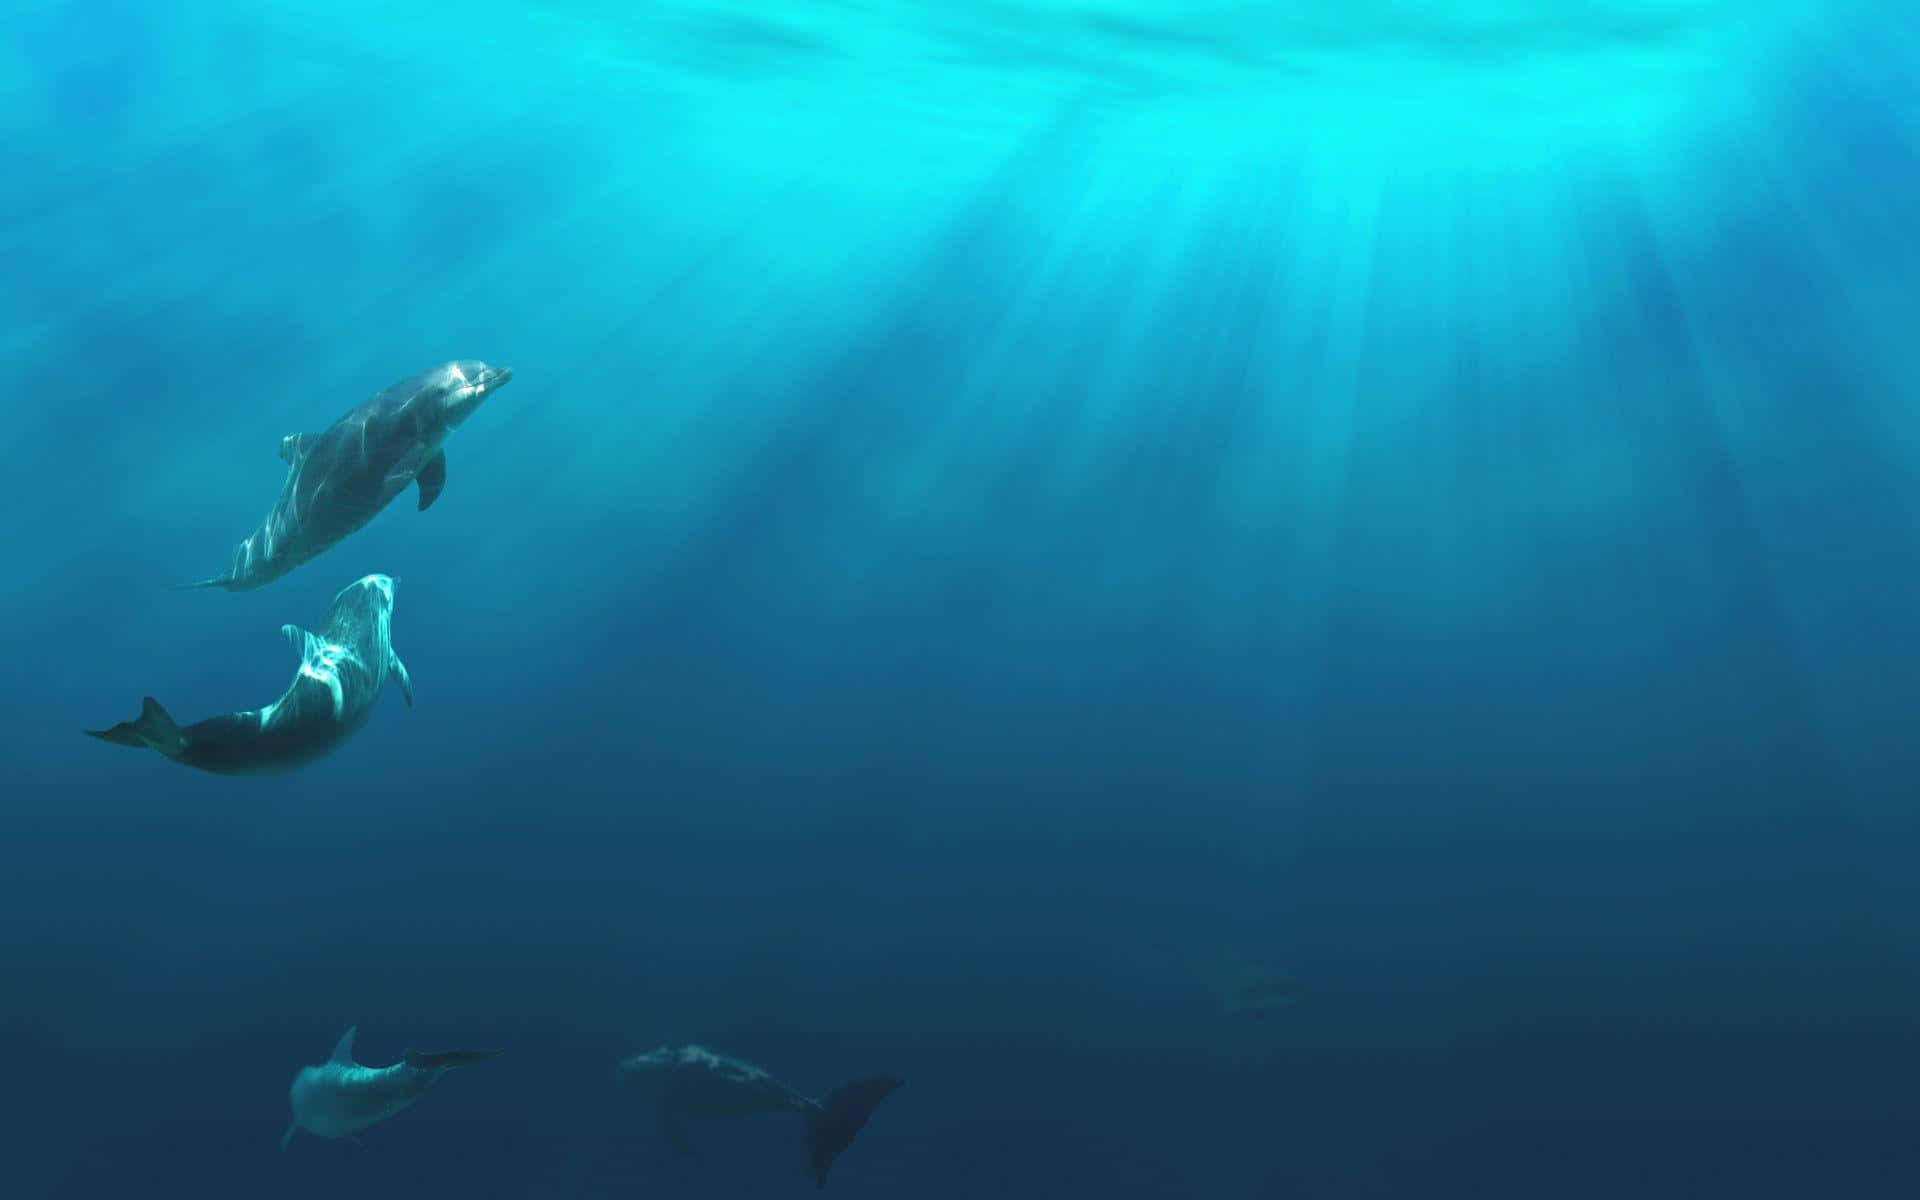 Dive into the beauty of the Underwater Ocean